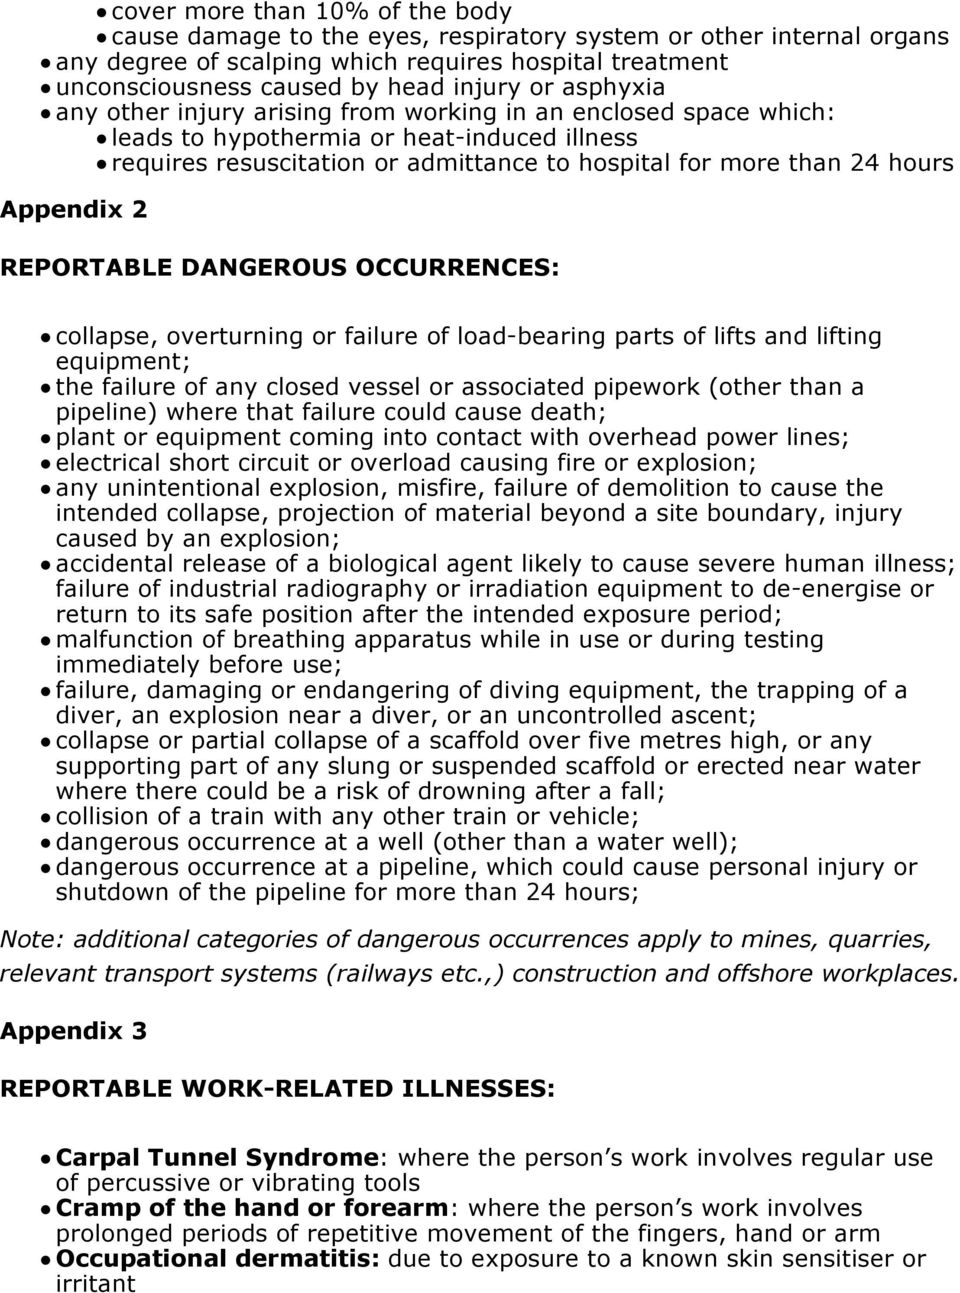 Appendix 2 REPORTABLE DANGEROUS OCCURRENCES: collapse, overturning or failure of load-bearing parts of lifts and lifting equipment; the failure of any closed vessel or associated pipework (other than